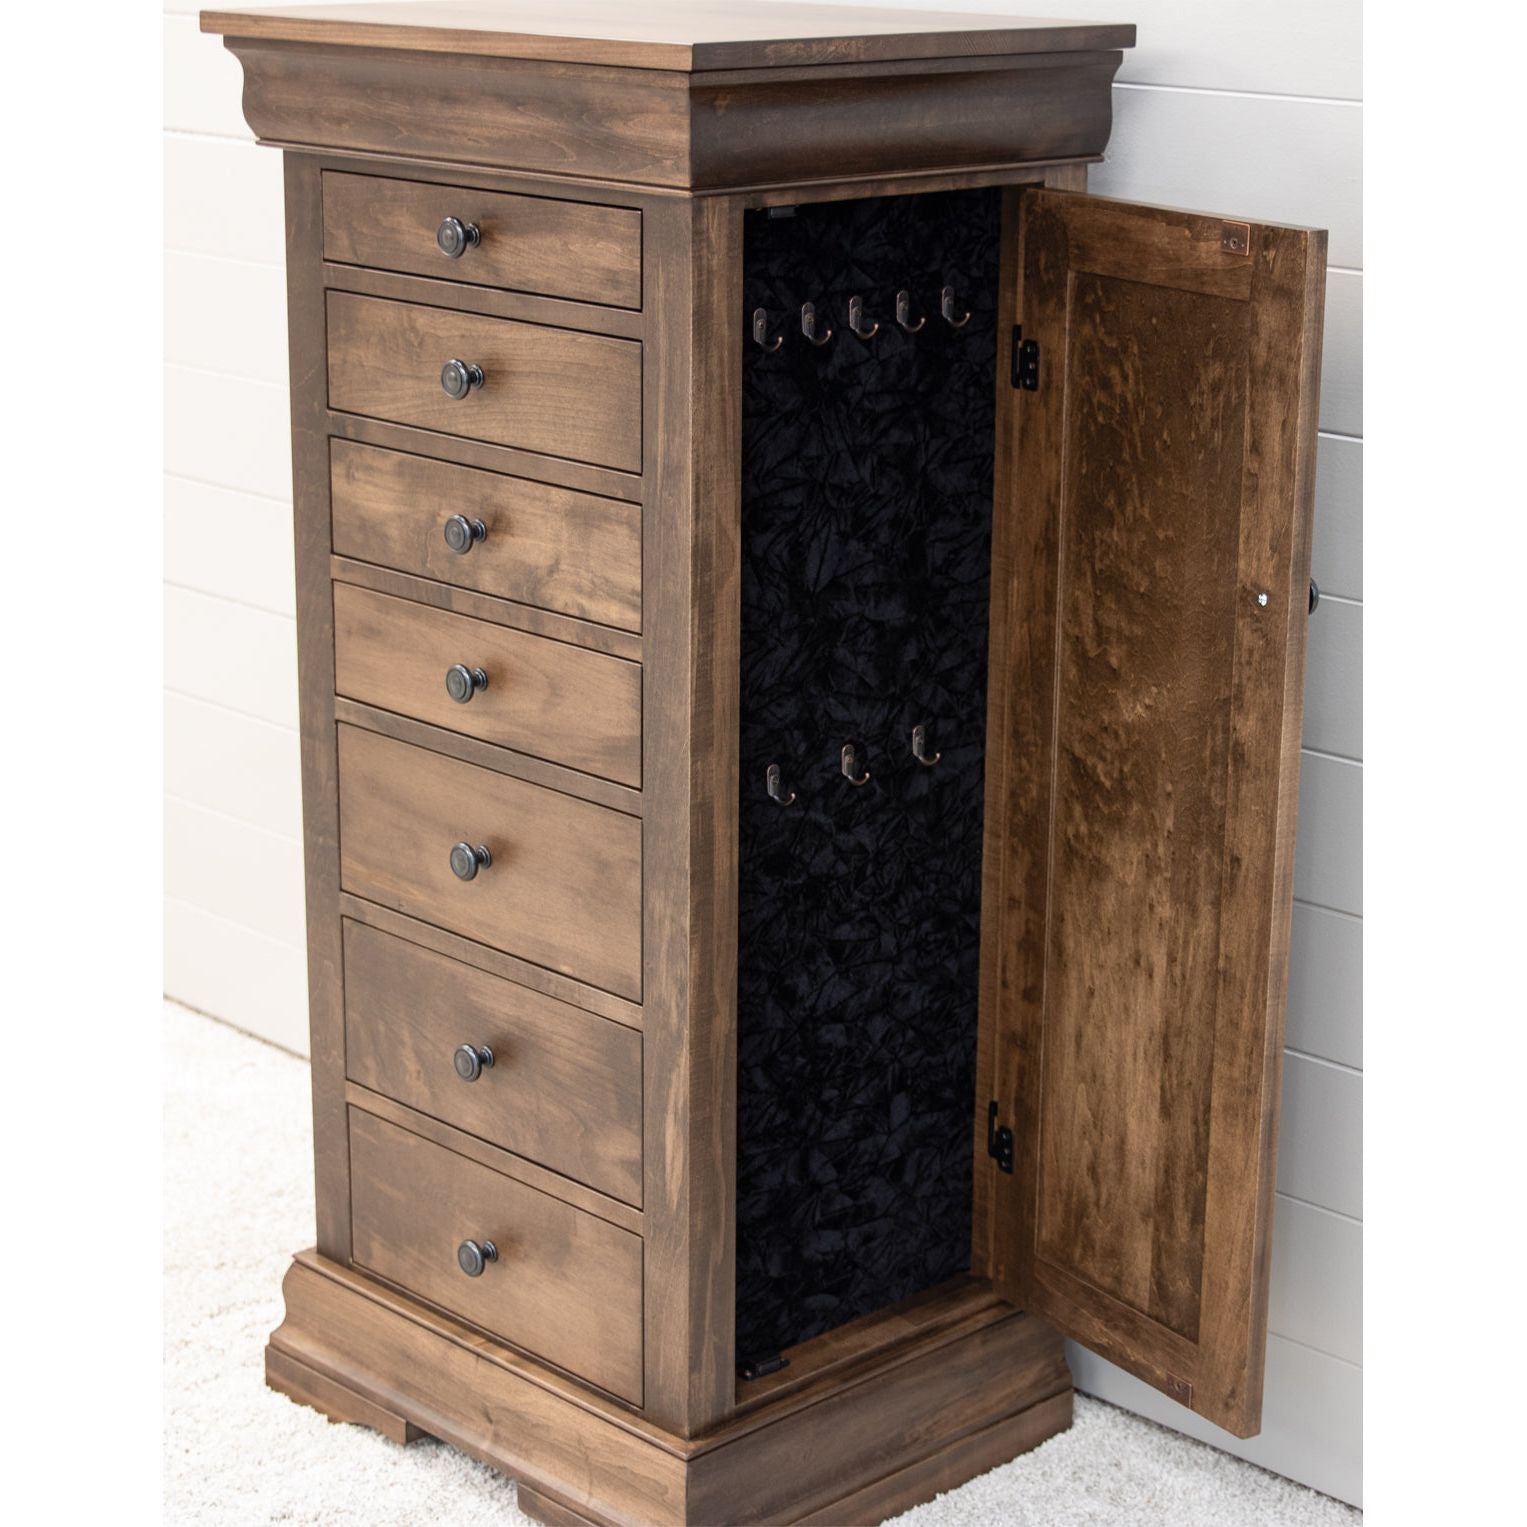 Louis Phillippe Jewelry Armoire